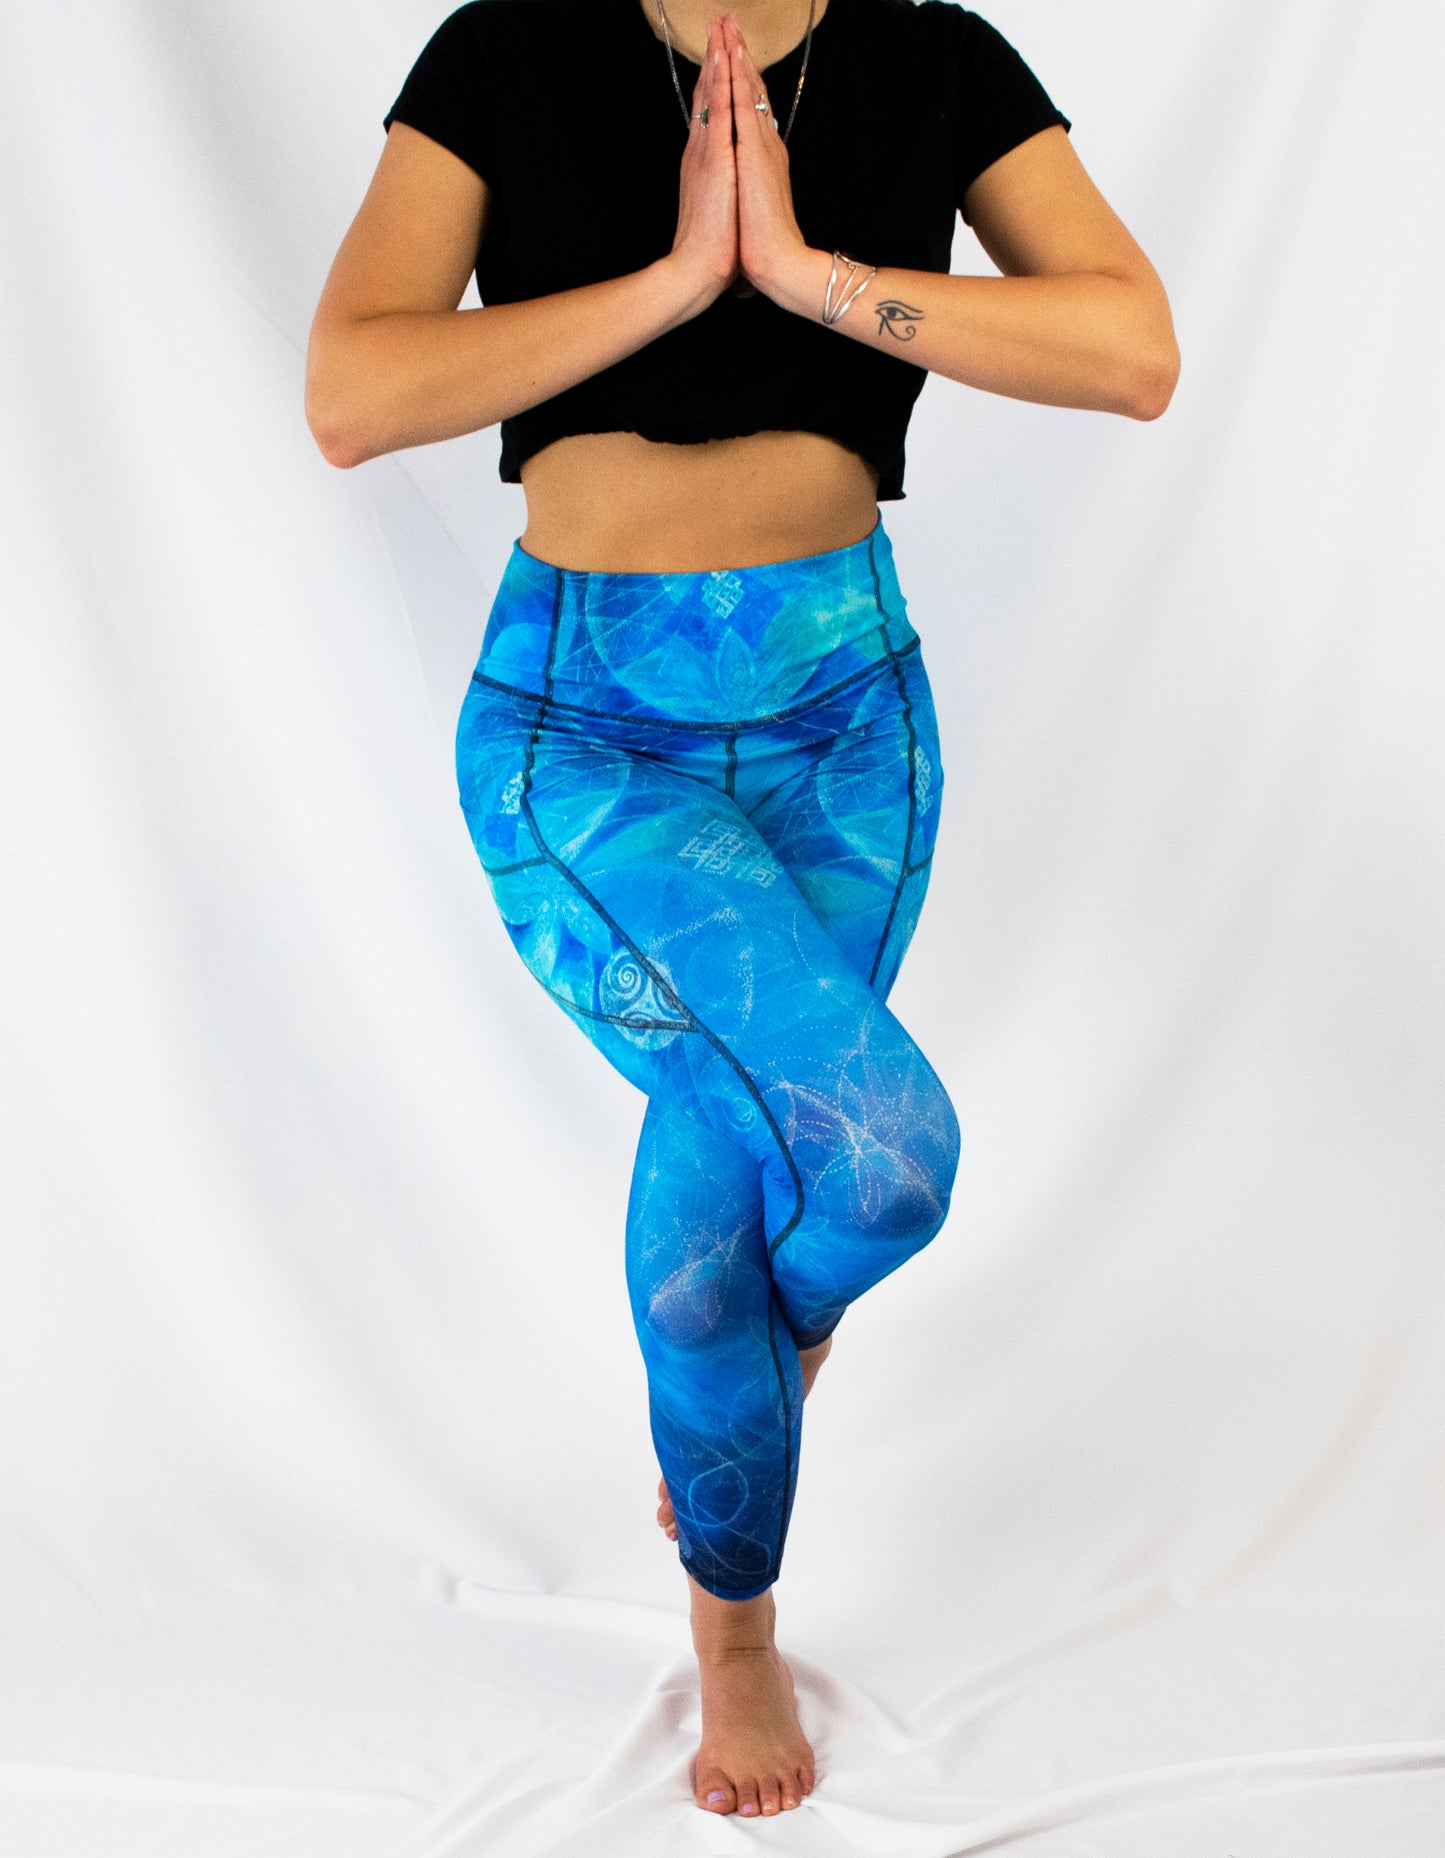 "Seeds of Support" Yoga Leggings